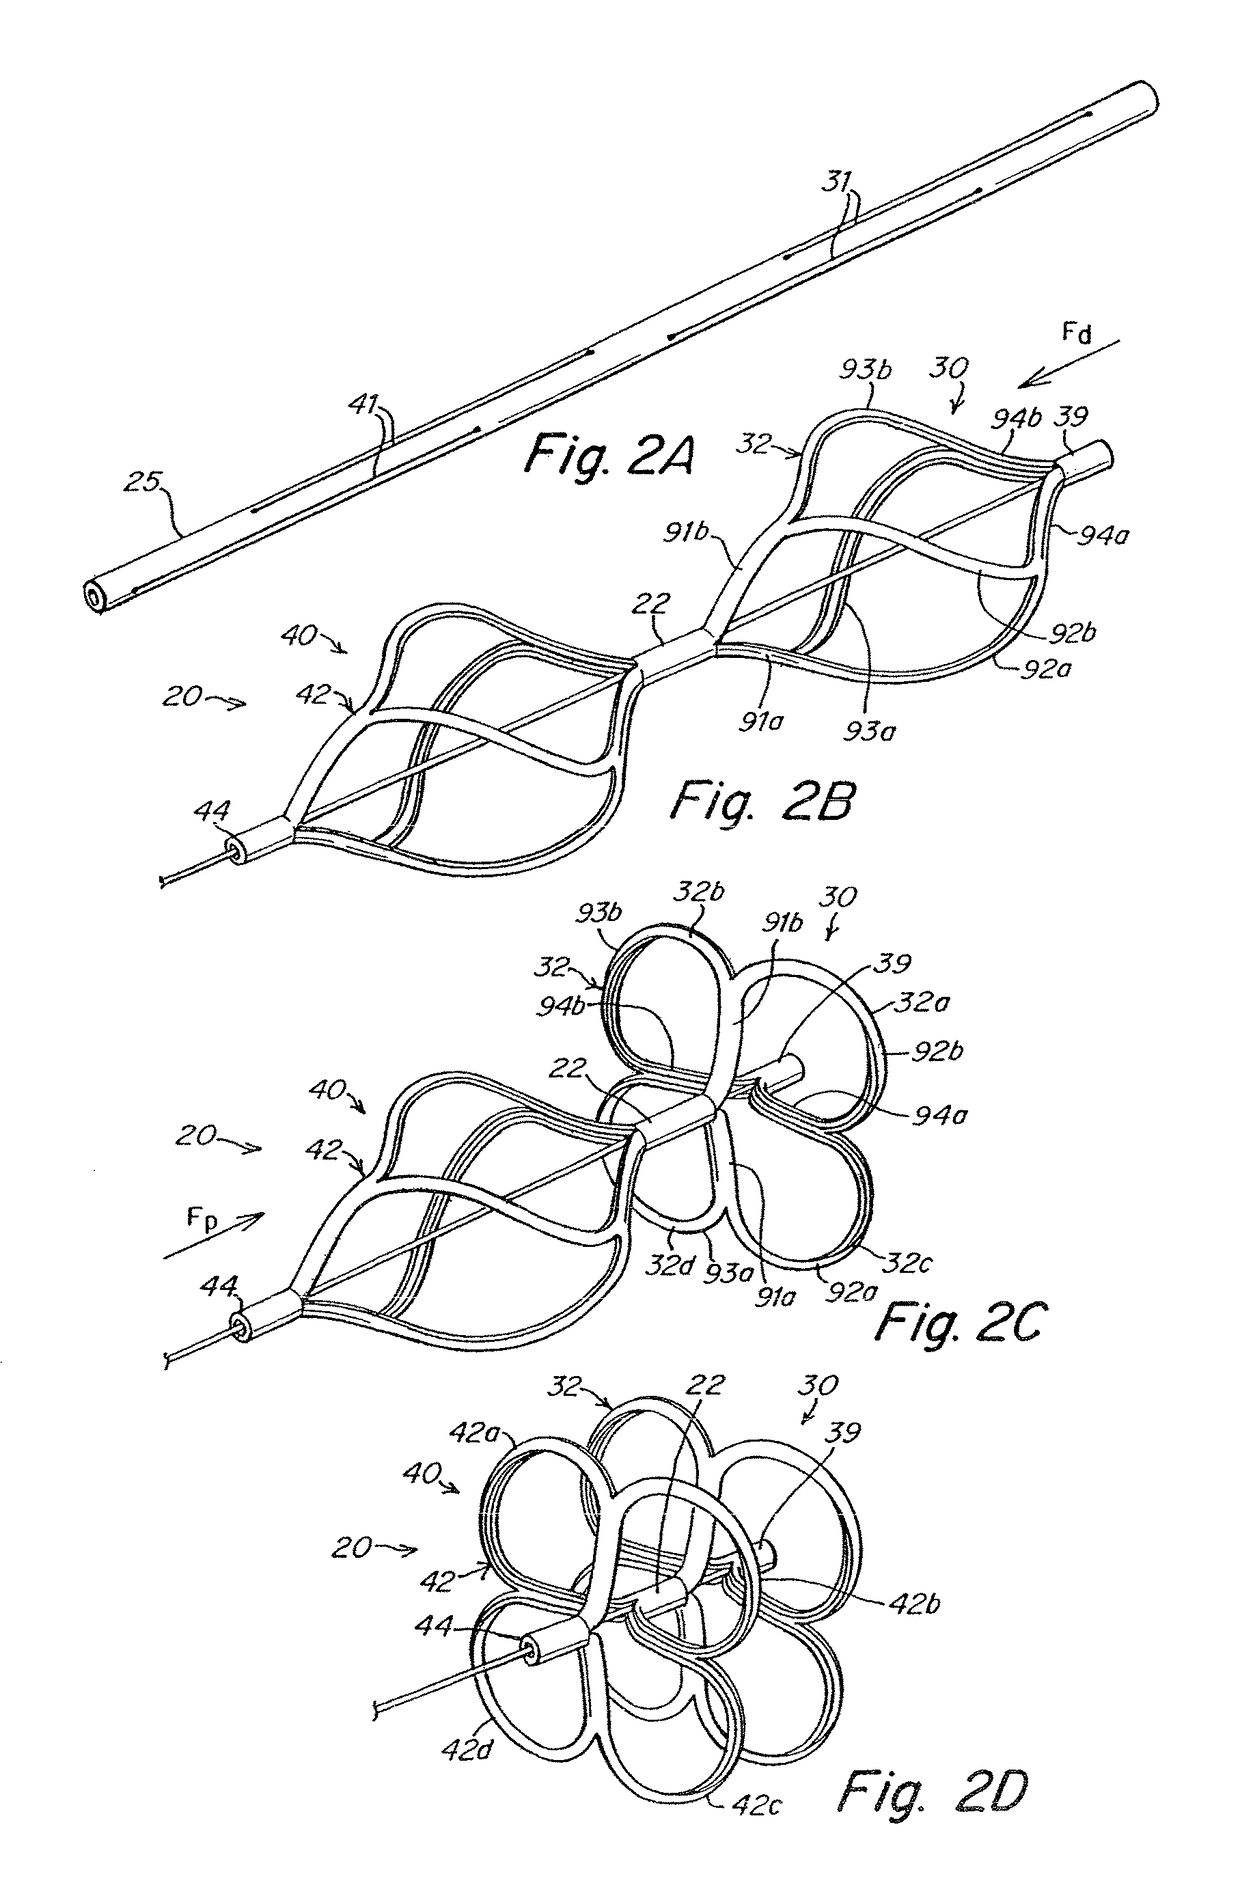 Patent foramen ovale (PFO) closure device with linearly elongating petals